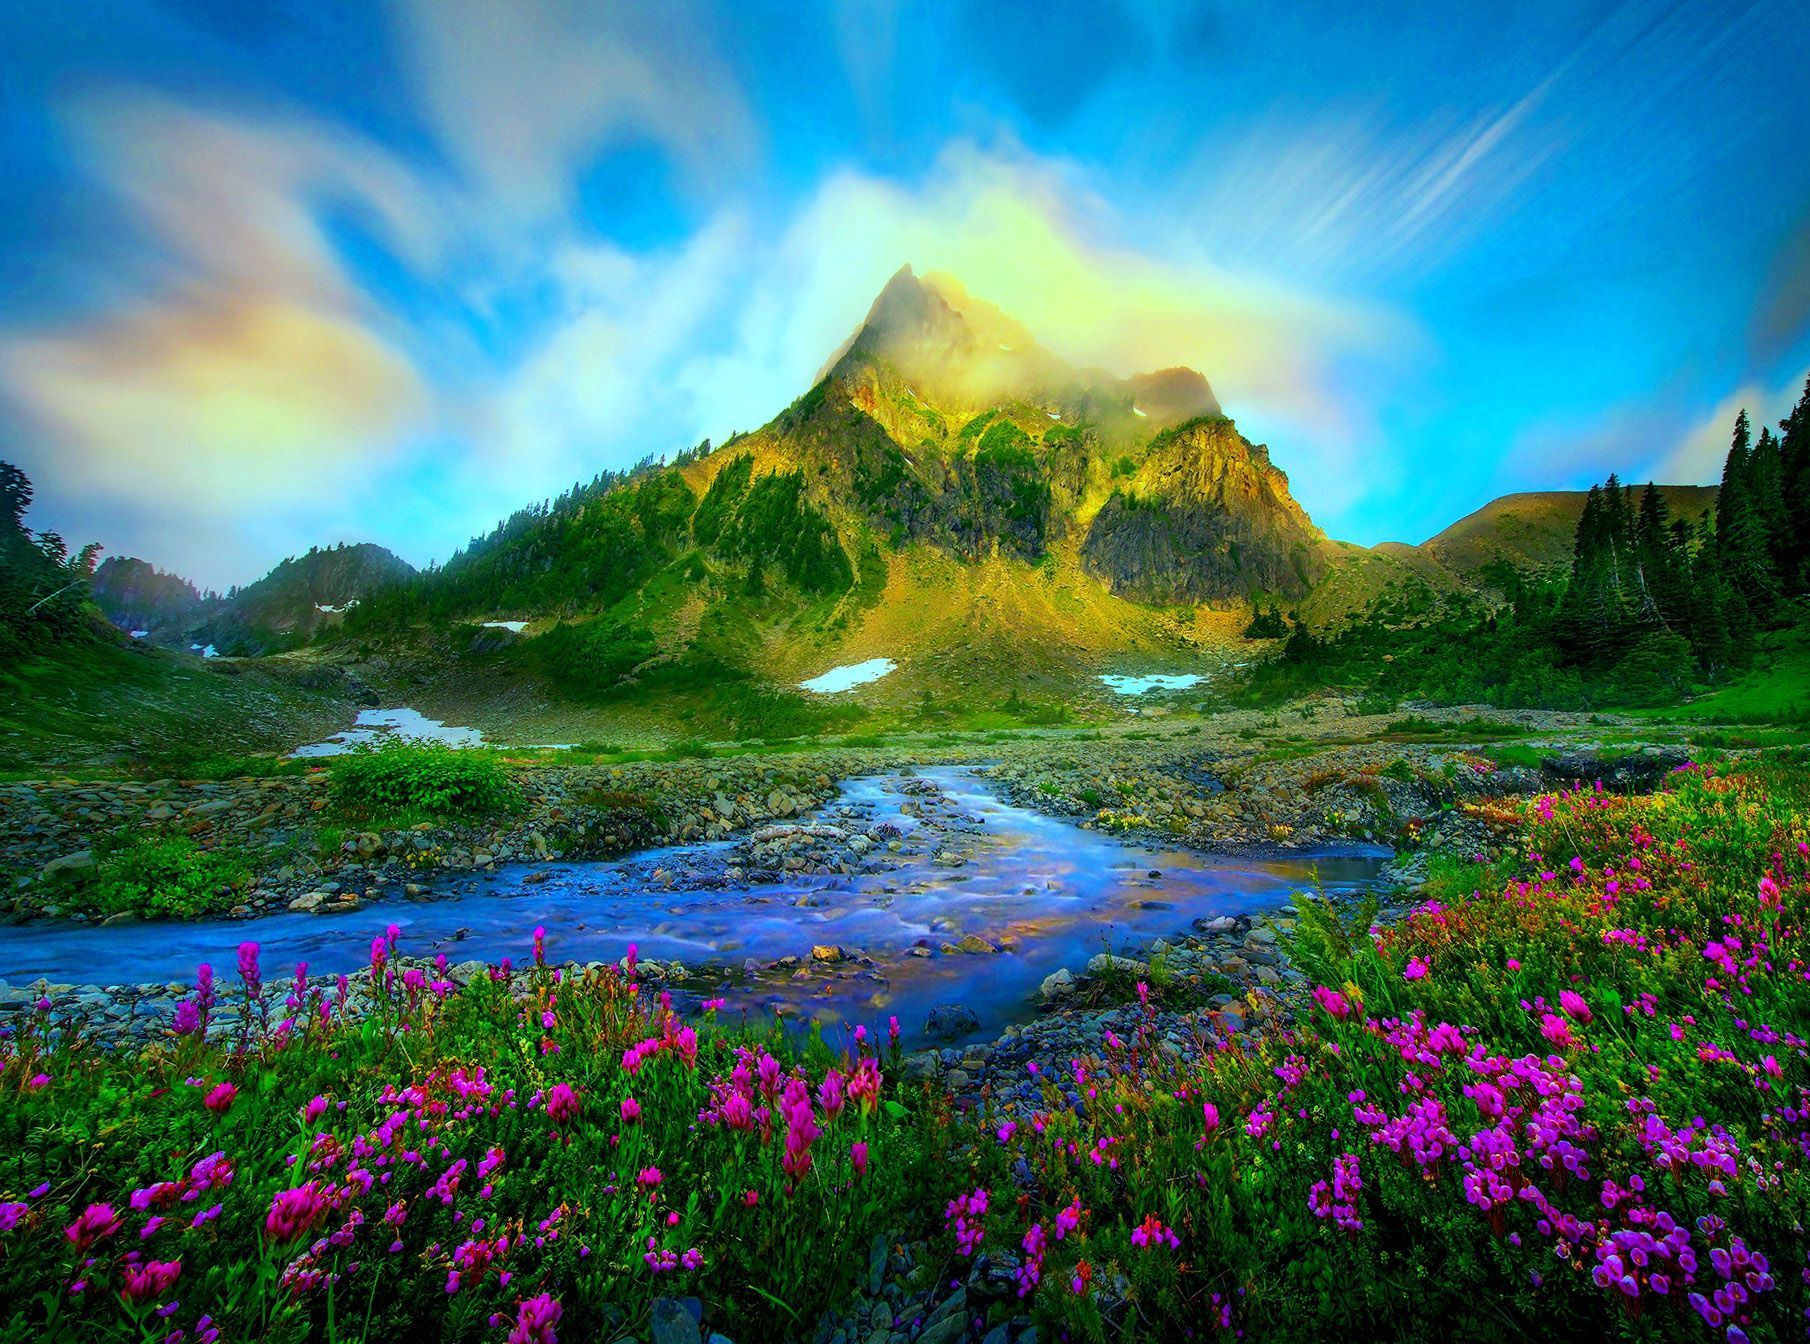 Nature Wallpapers, Hd Landscape Images, Widescreen, Wallpaper Of